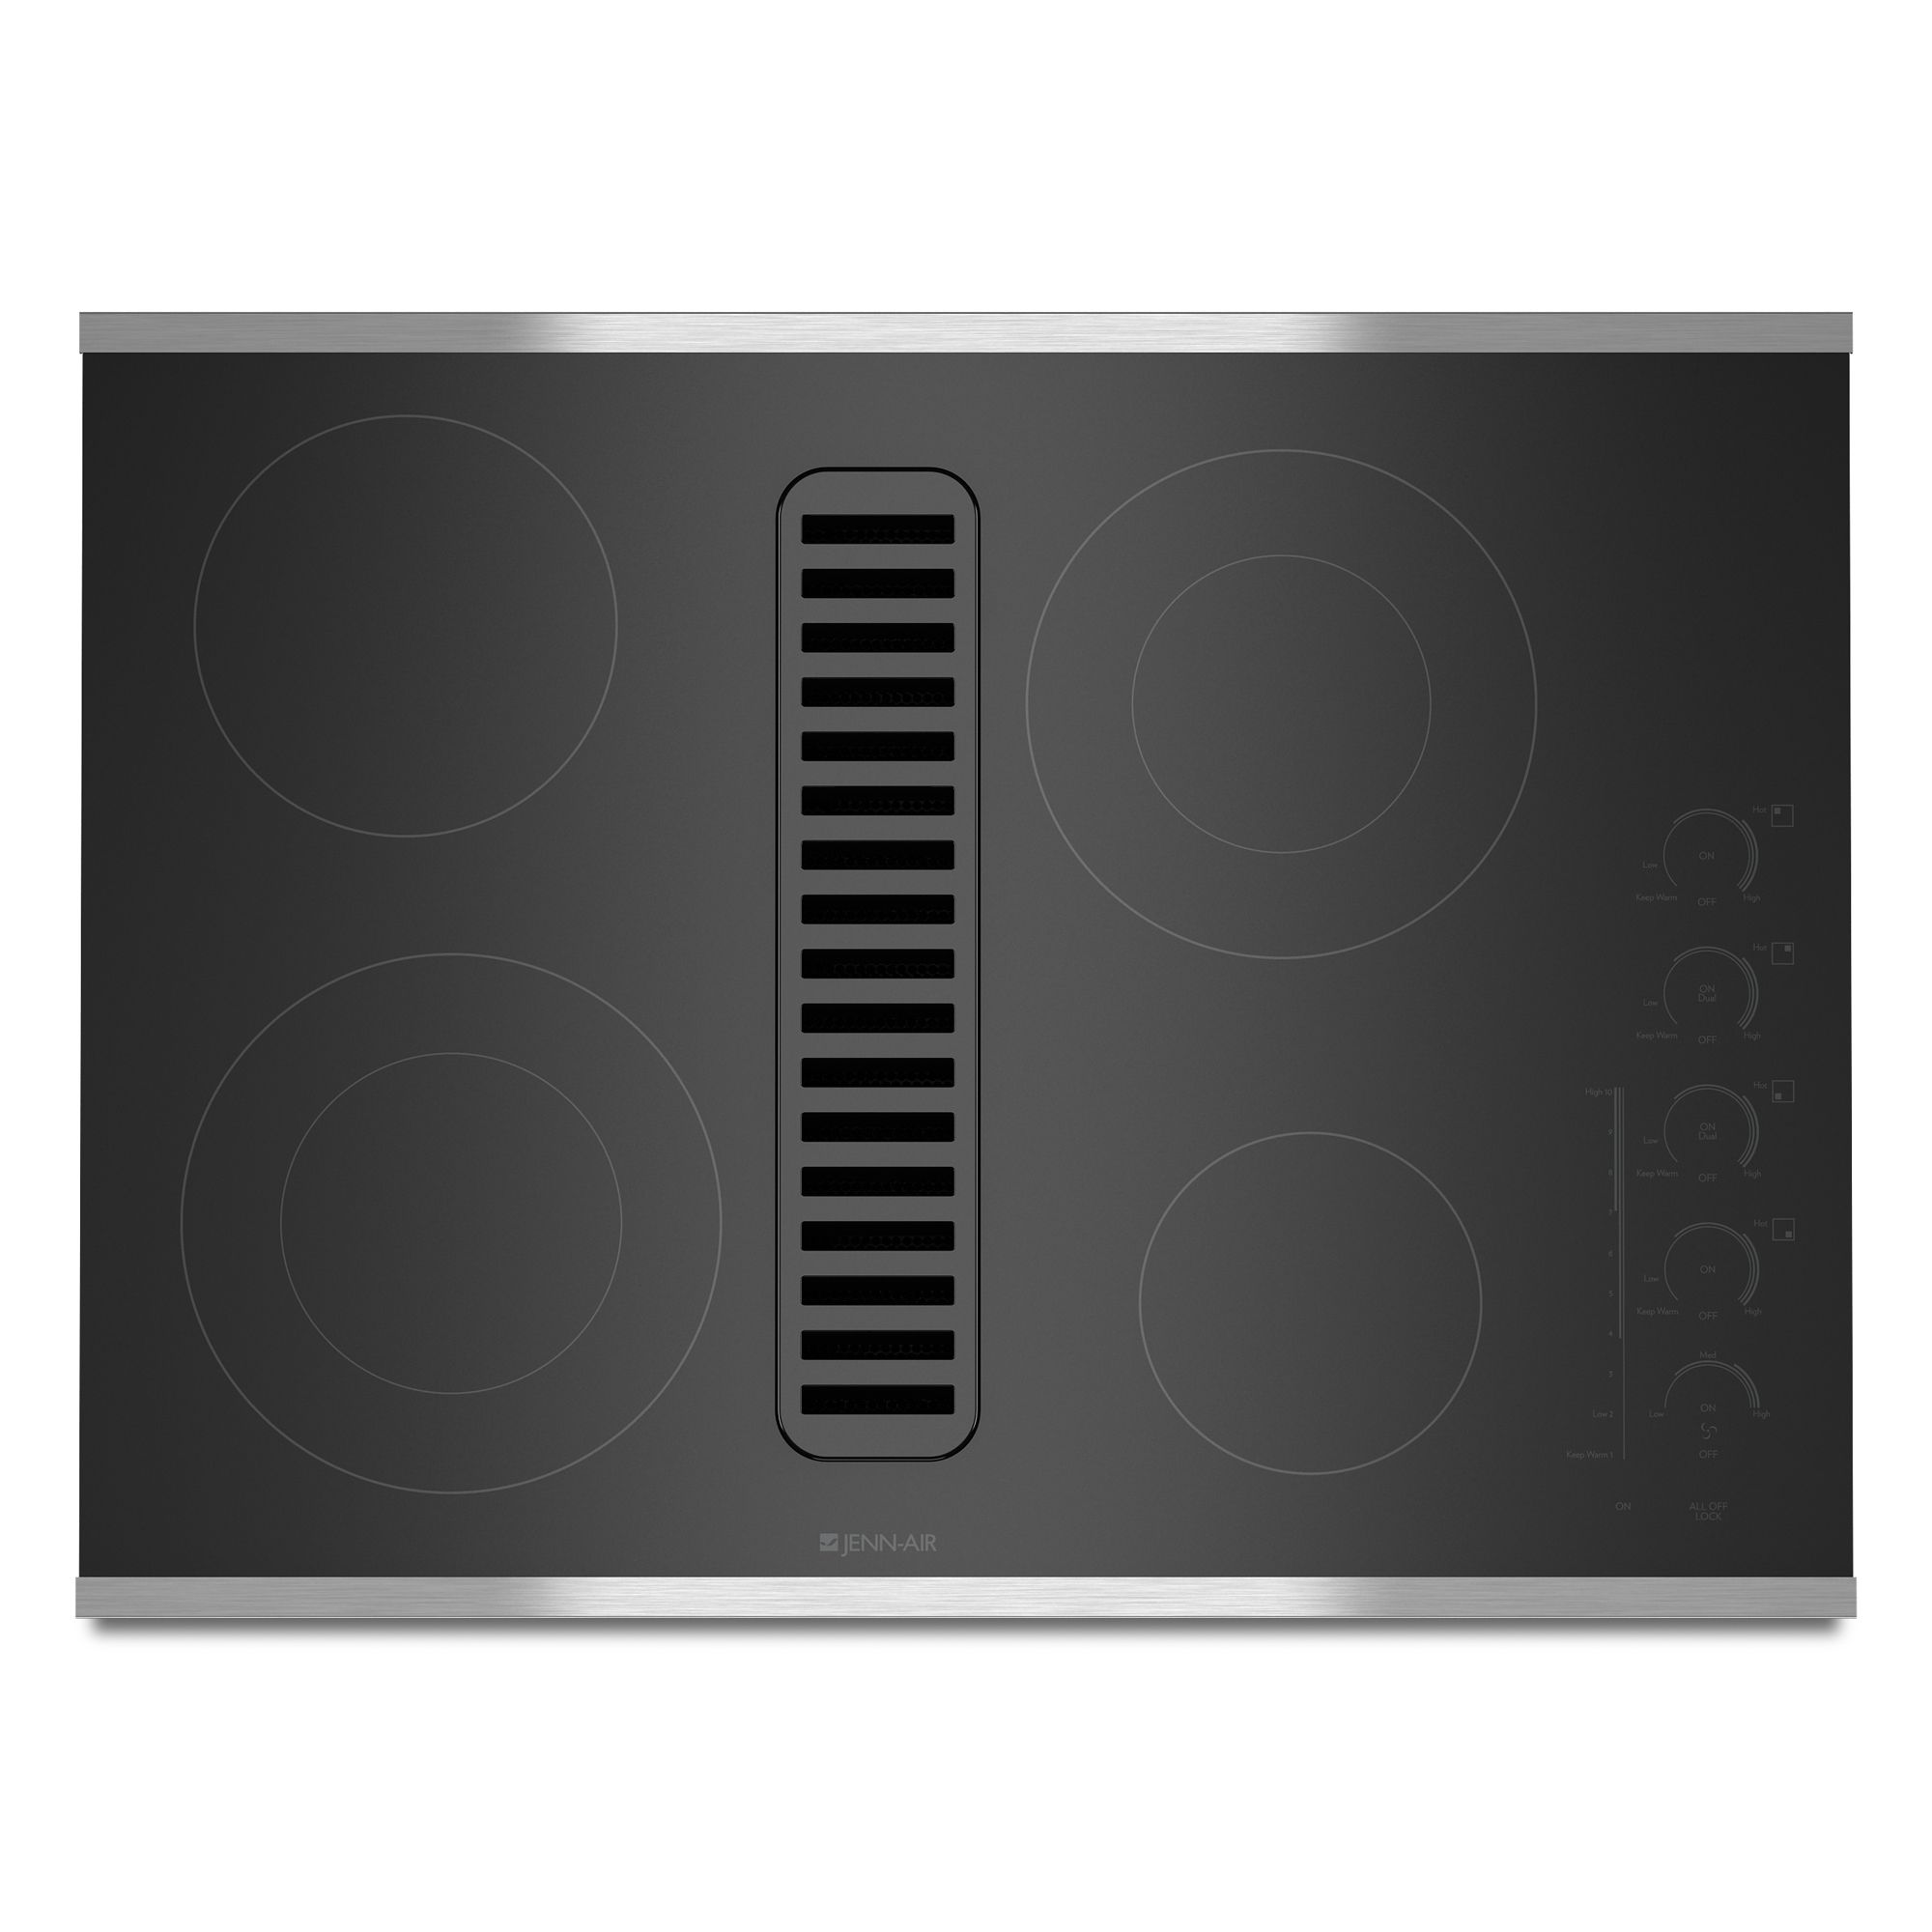 Jenn-Air JED4430WS 30" Electric Radiant Downdraft Cooktop